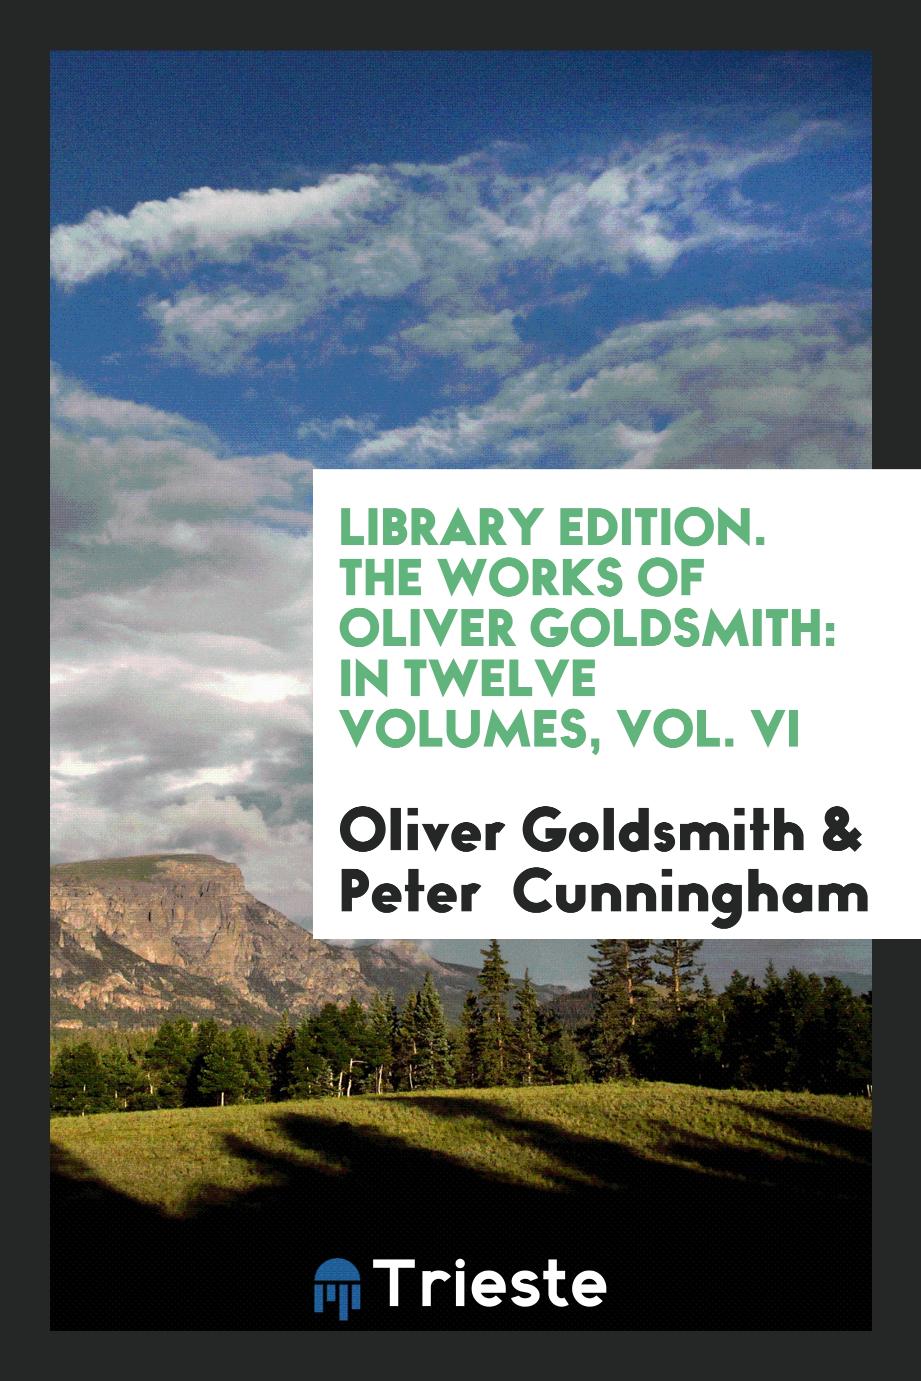 Library Edition. The Works of Oliver Goldsmith: In Twelve Volumes, Vol. VI